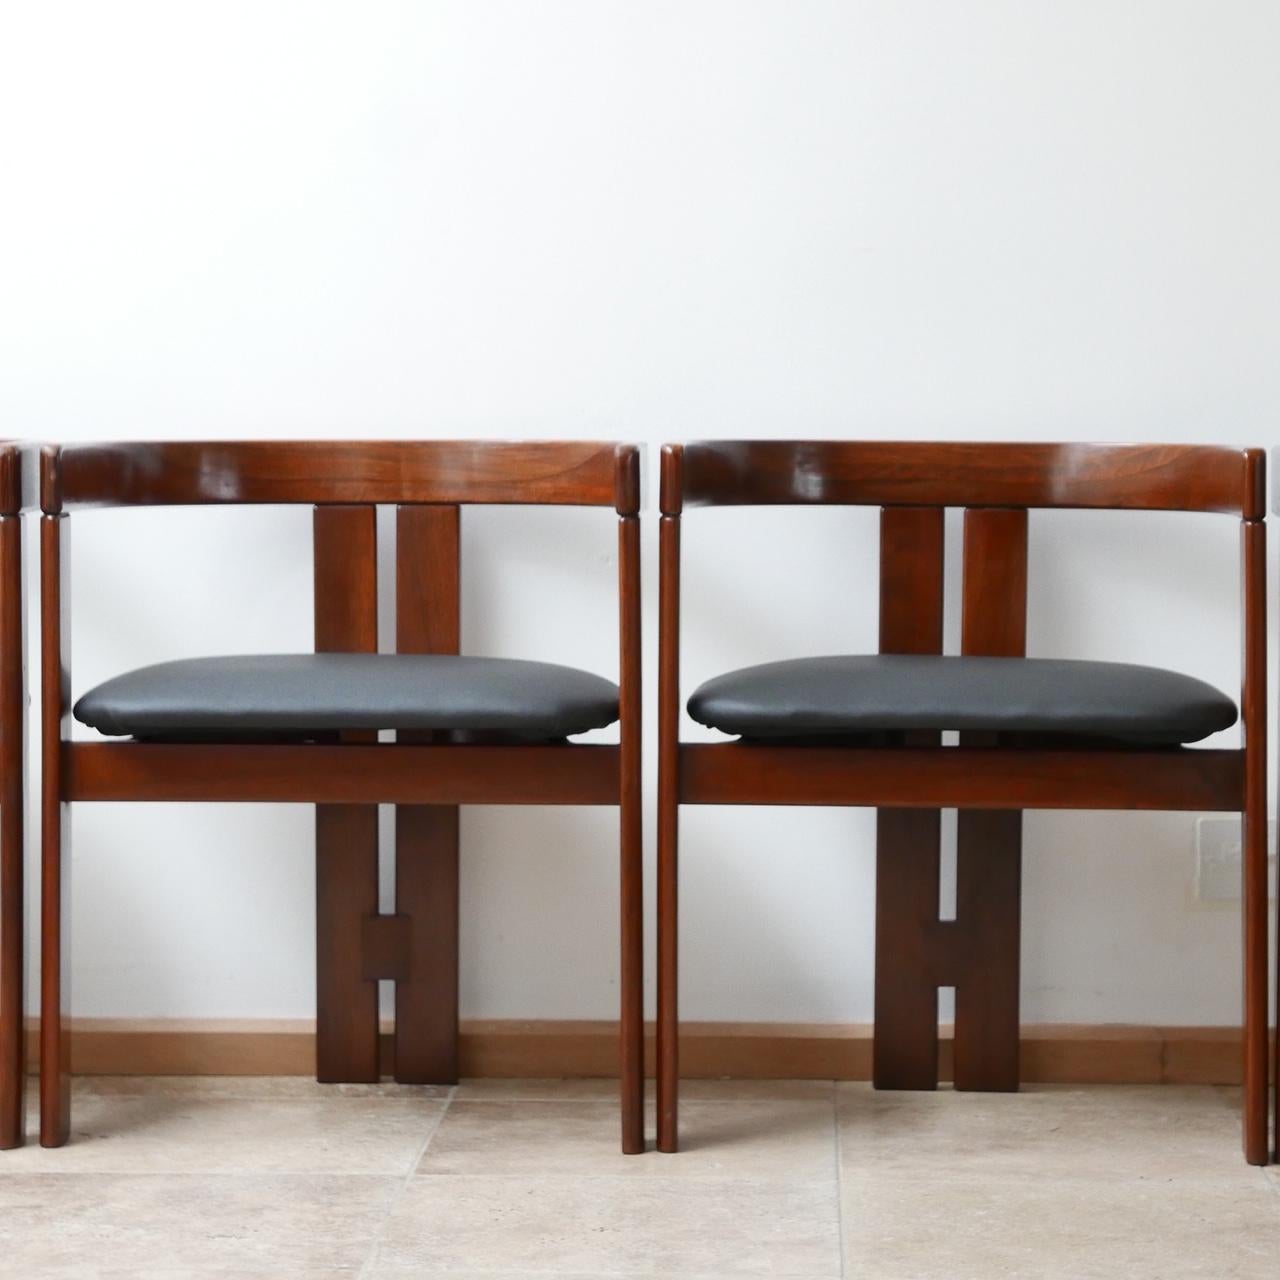 'Pigreco' Italian Midcentury Dining Chairs Attributed to Tobia Scarpa 9